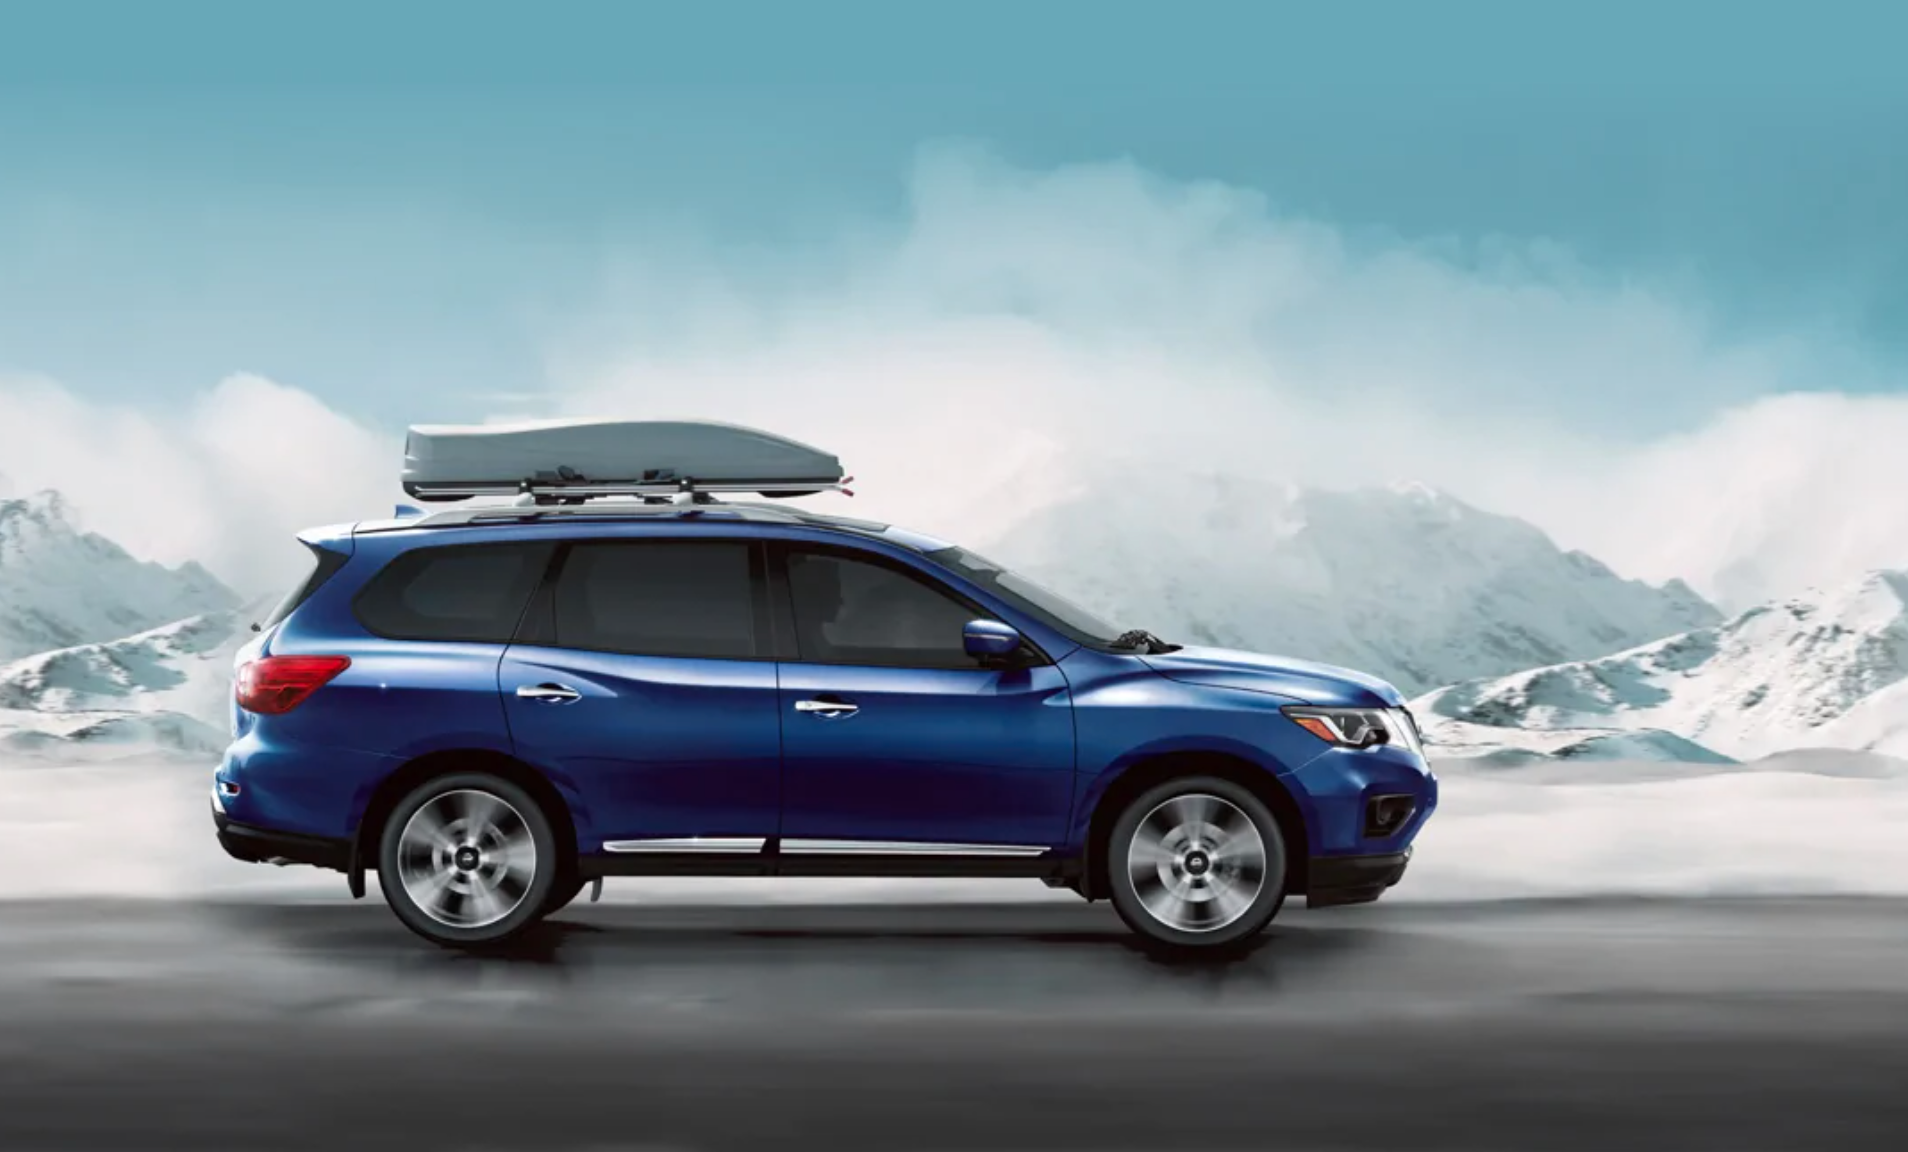 A blue 2020 Nissan Pathfinder driving down snowy road